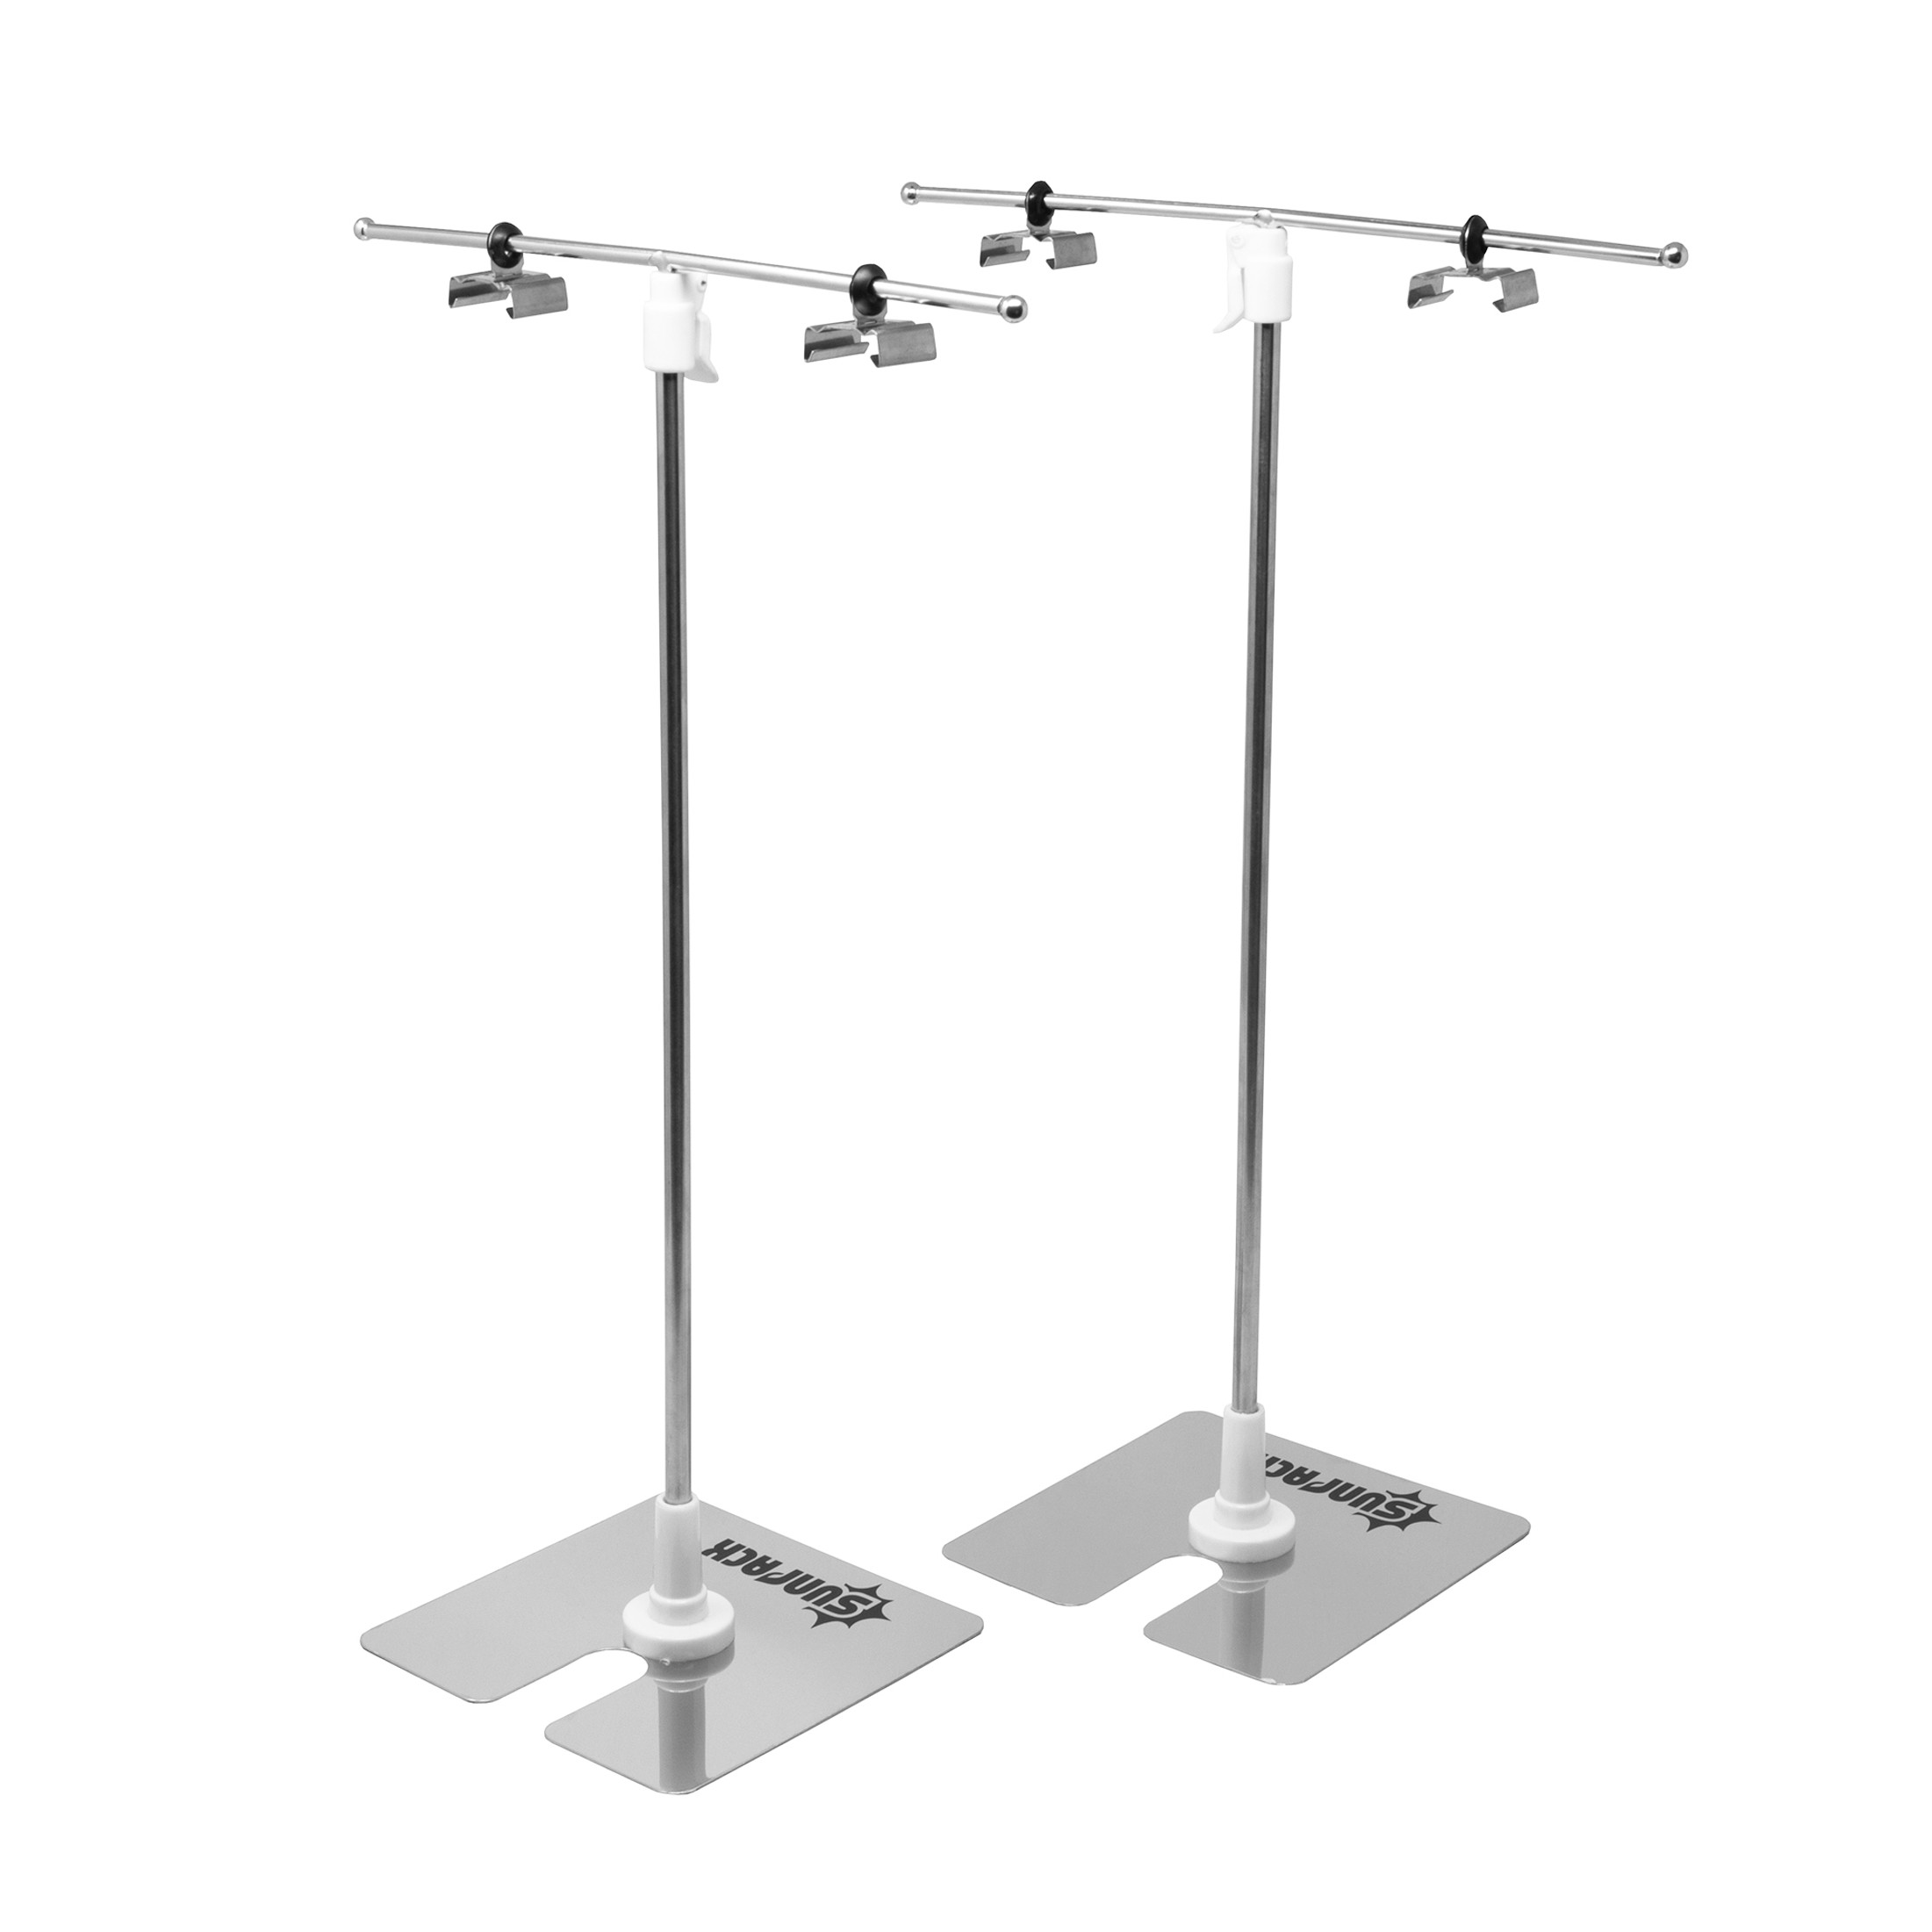 SunPack Mini Double Light Stand for Indoor Seed Starting / Gardening